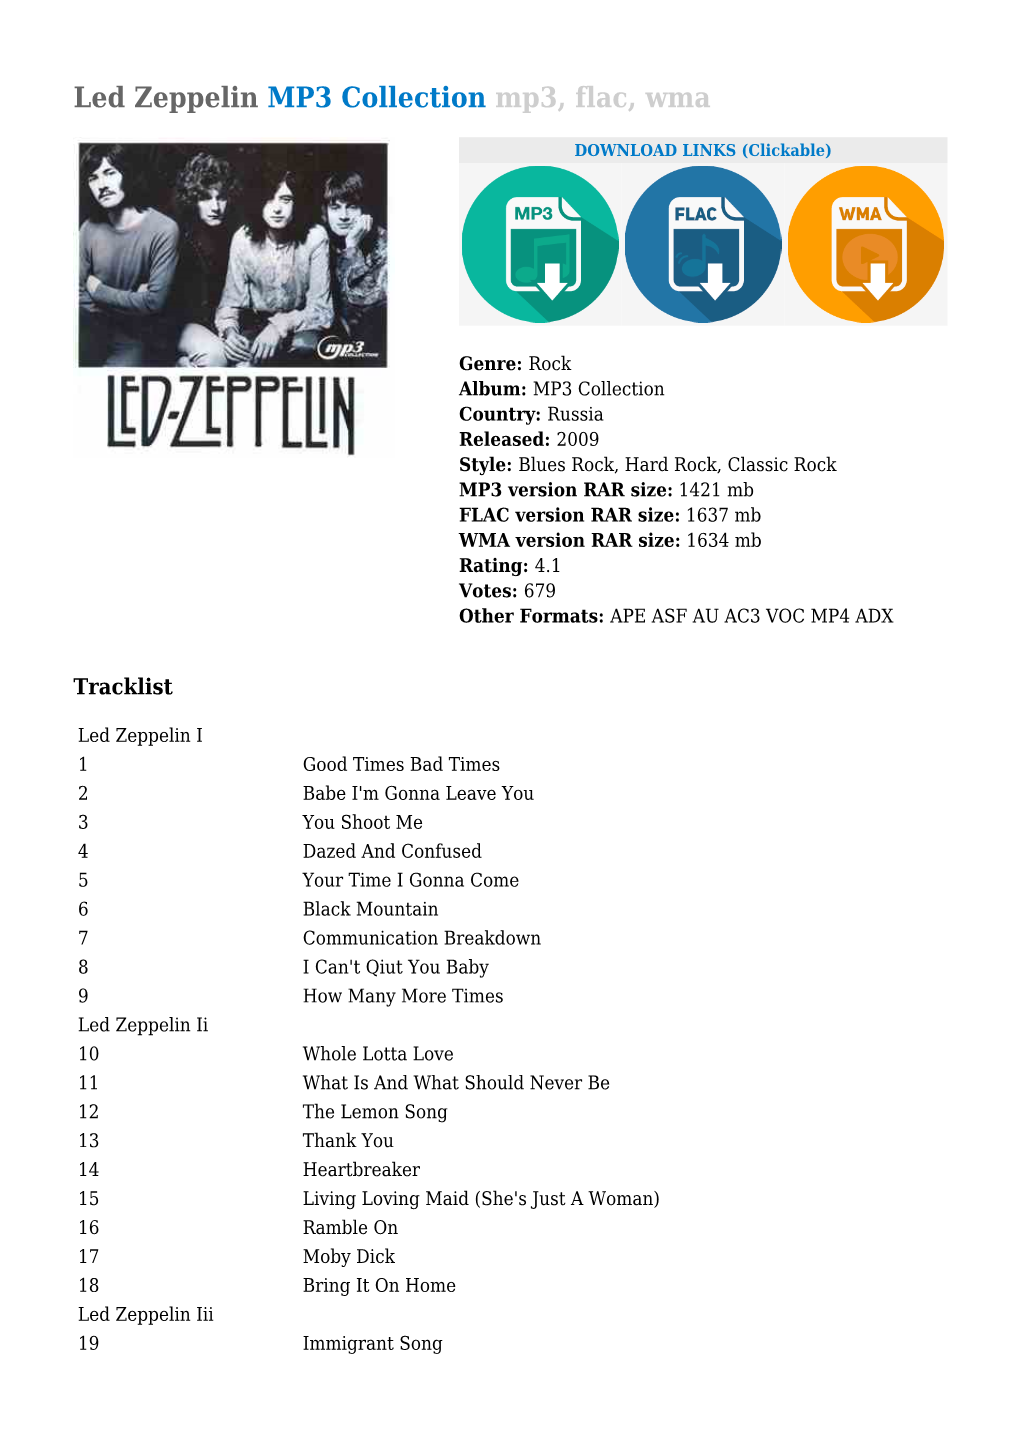 Led Zeppelin MP3 Collection Mp3, Flac, Wma